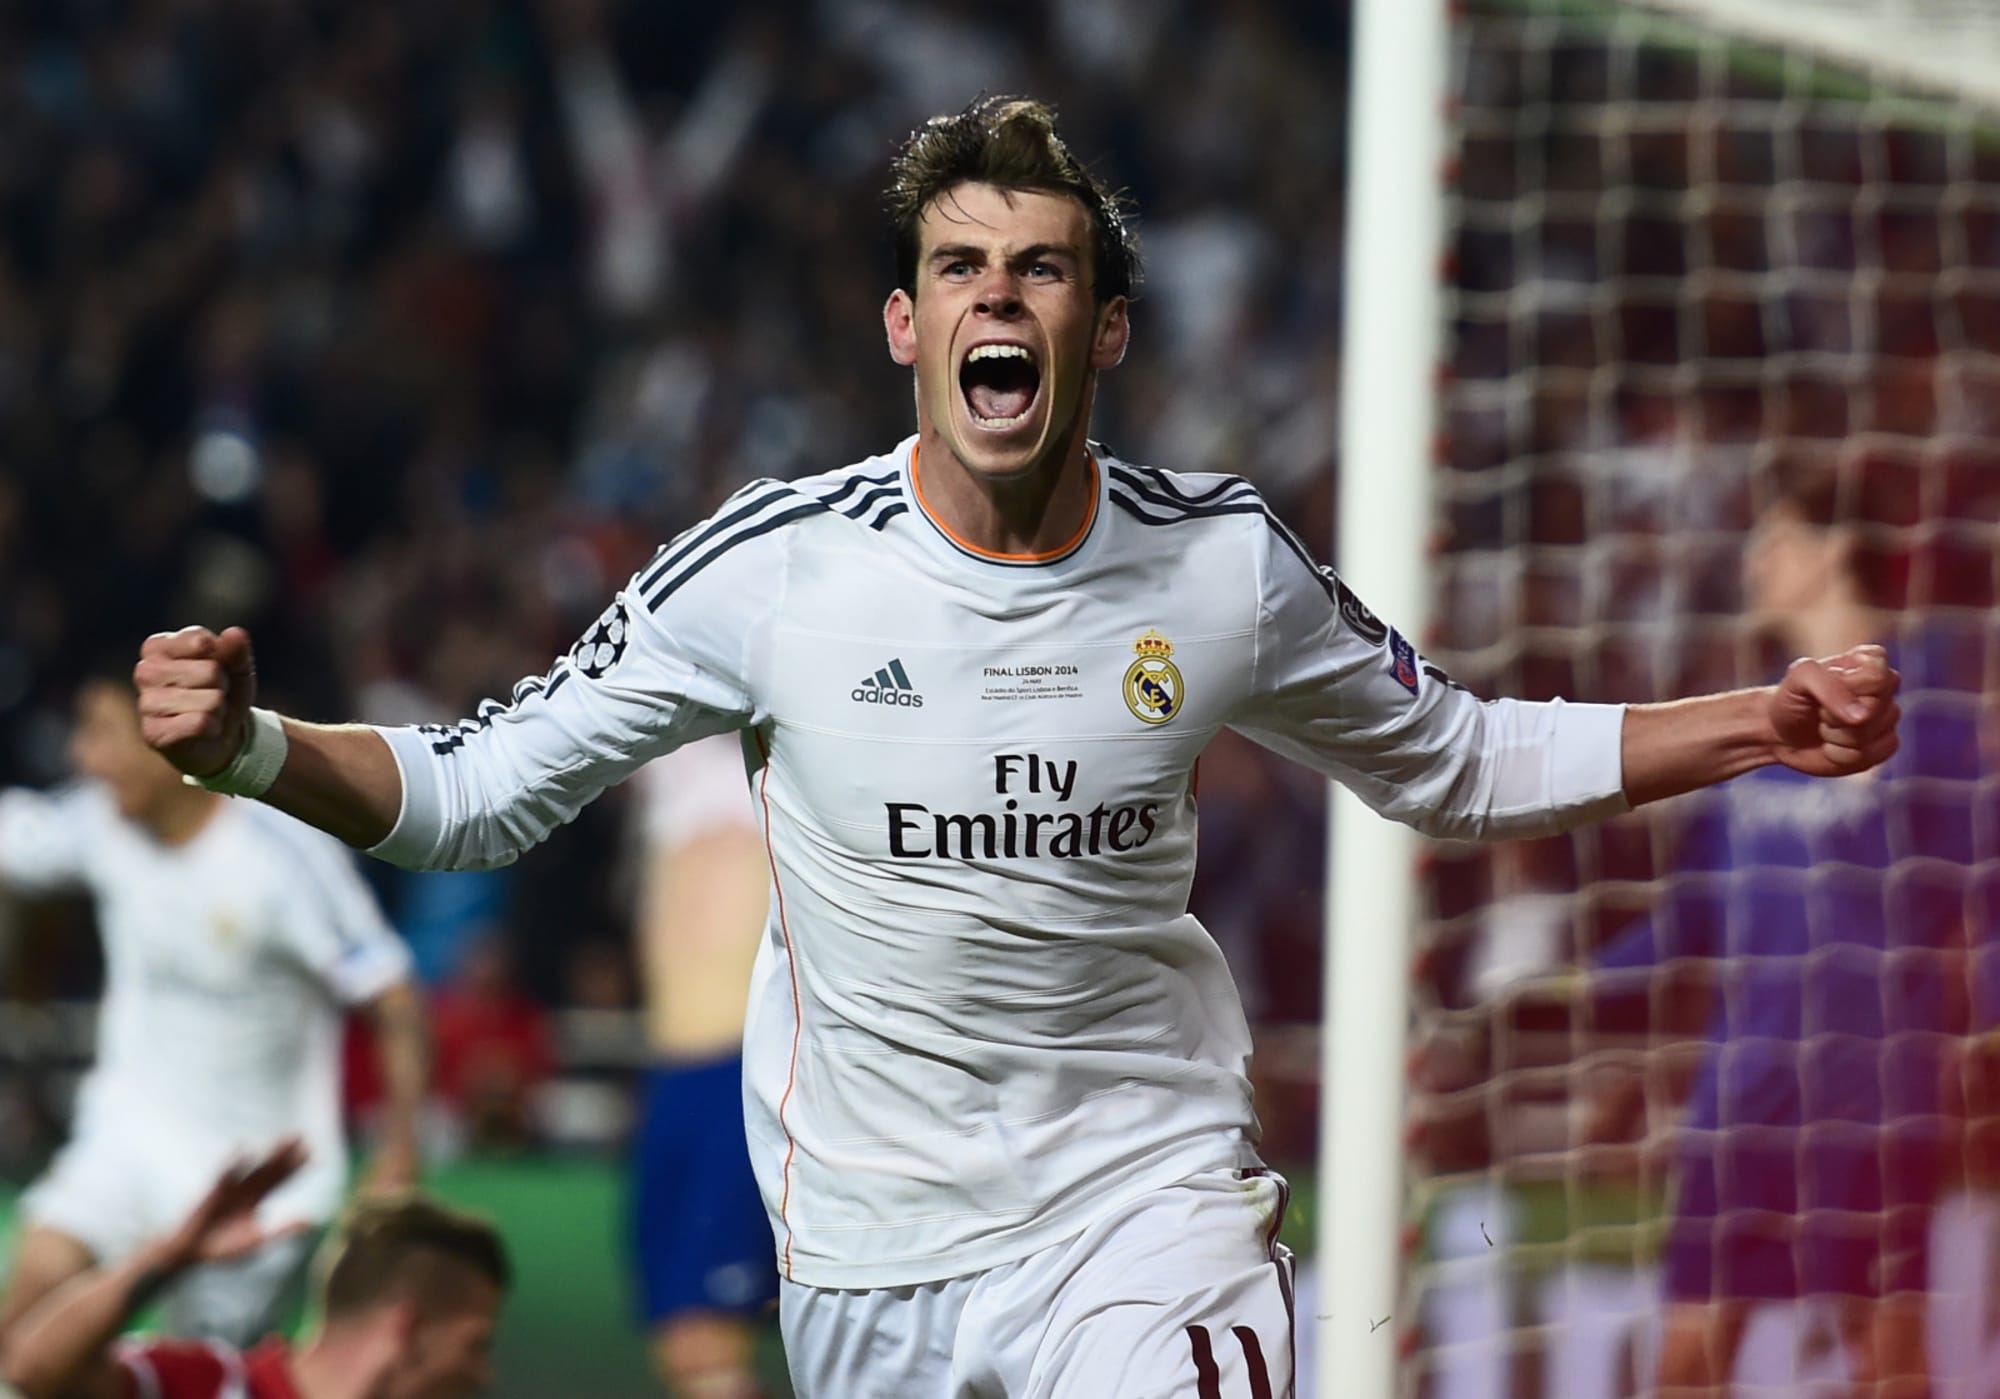 No, Gab, Gareth Bale to Real Madrid was not a bad transfer